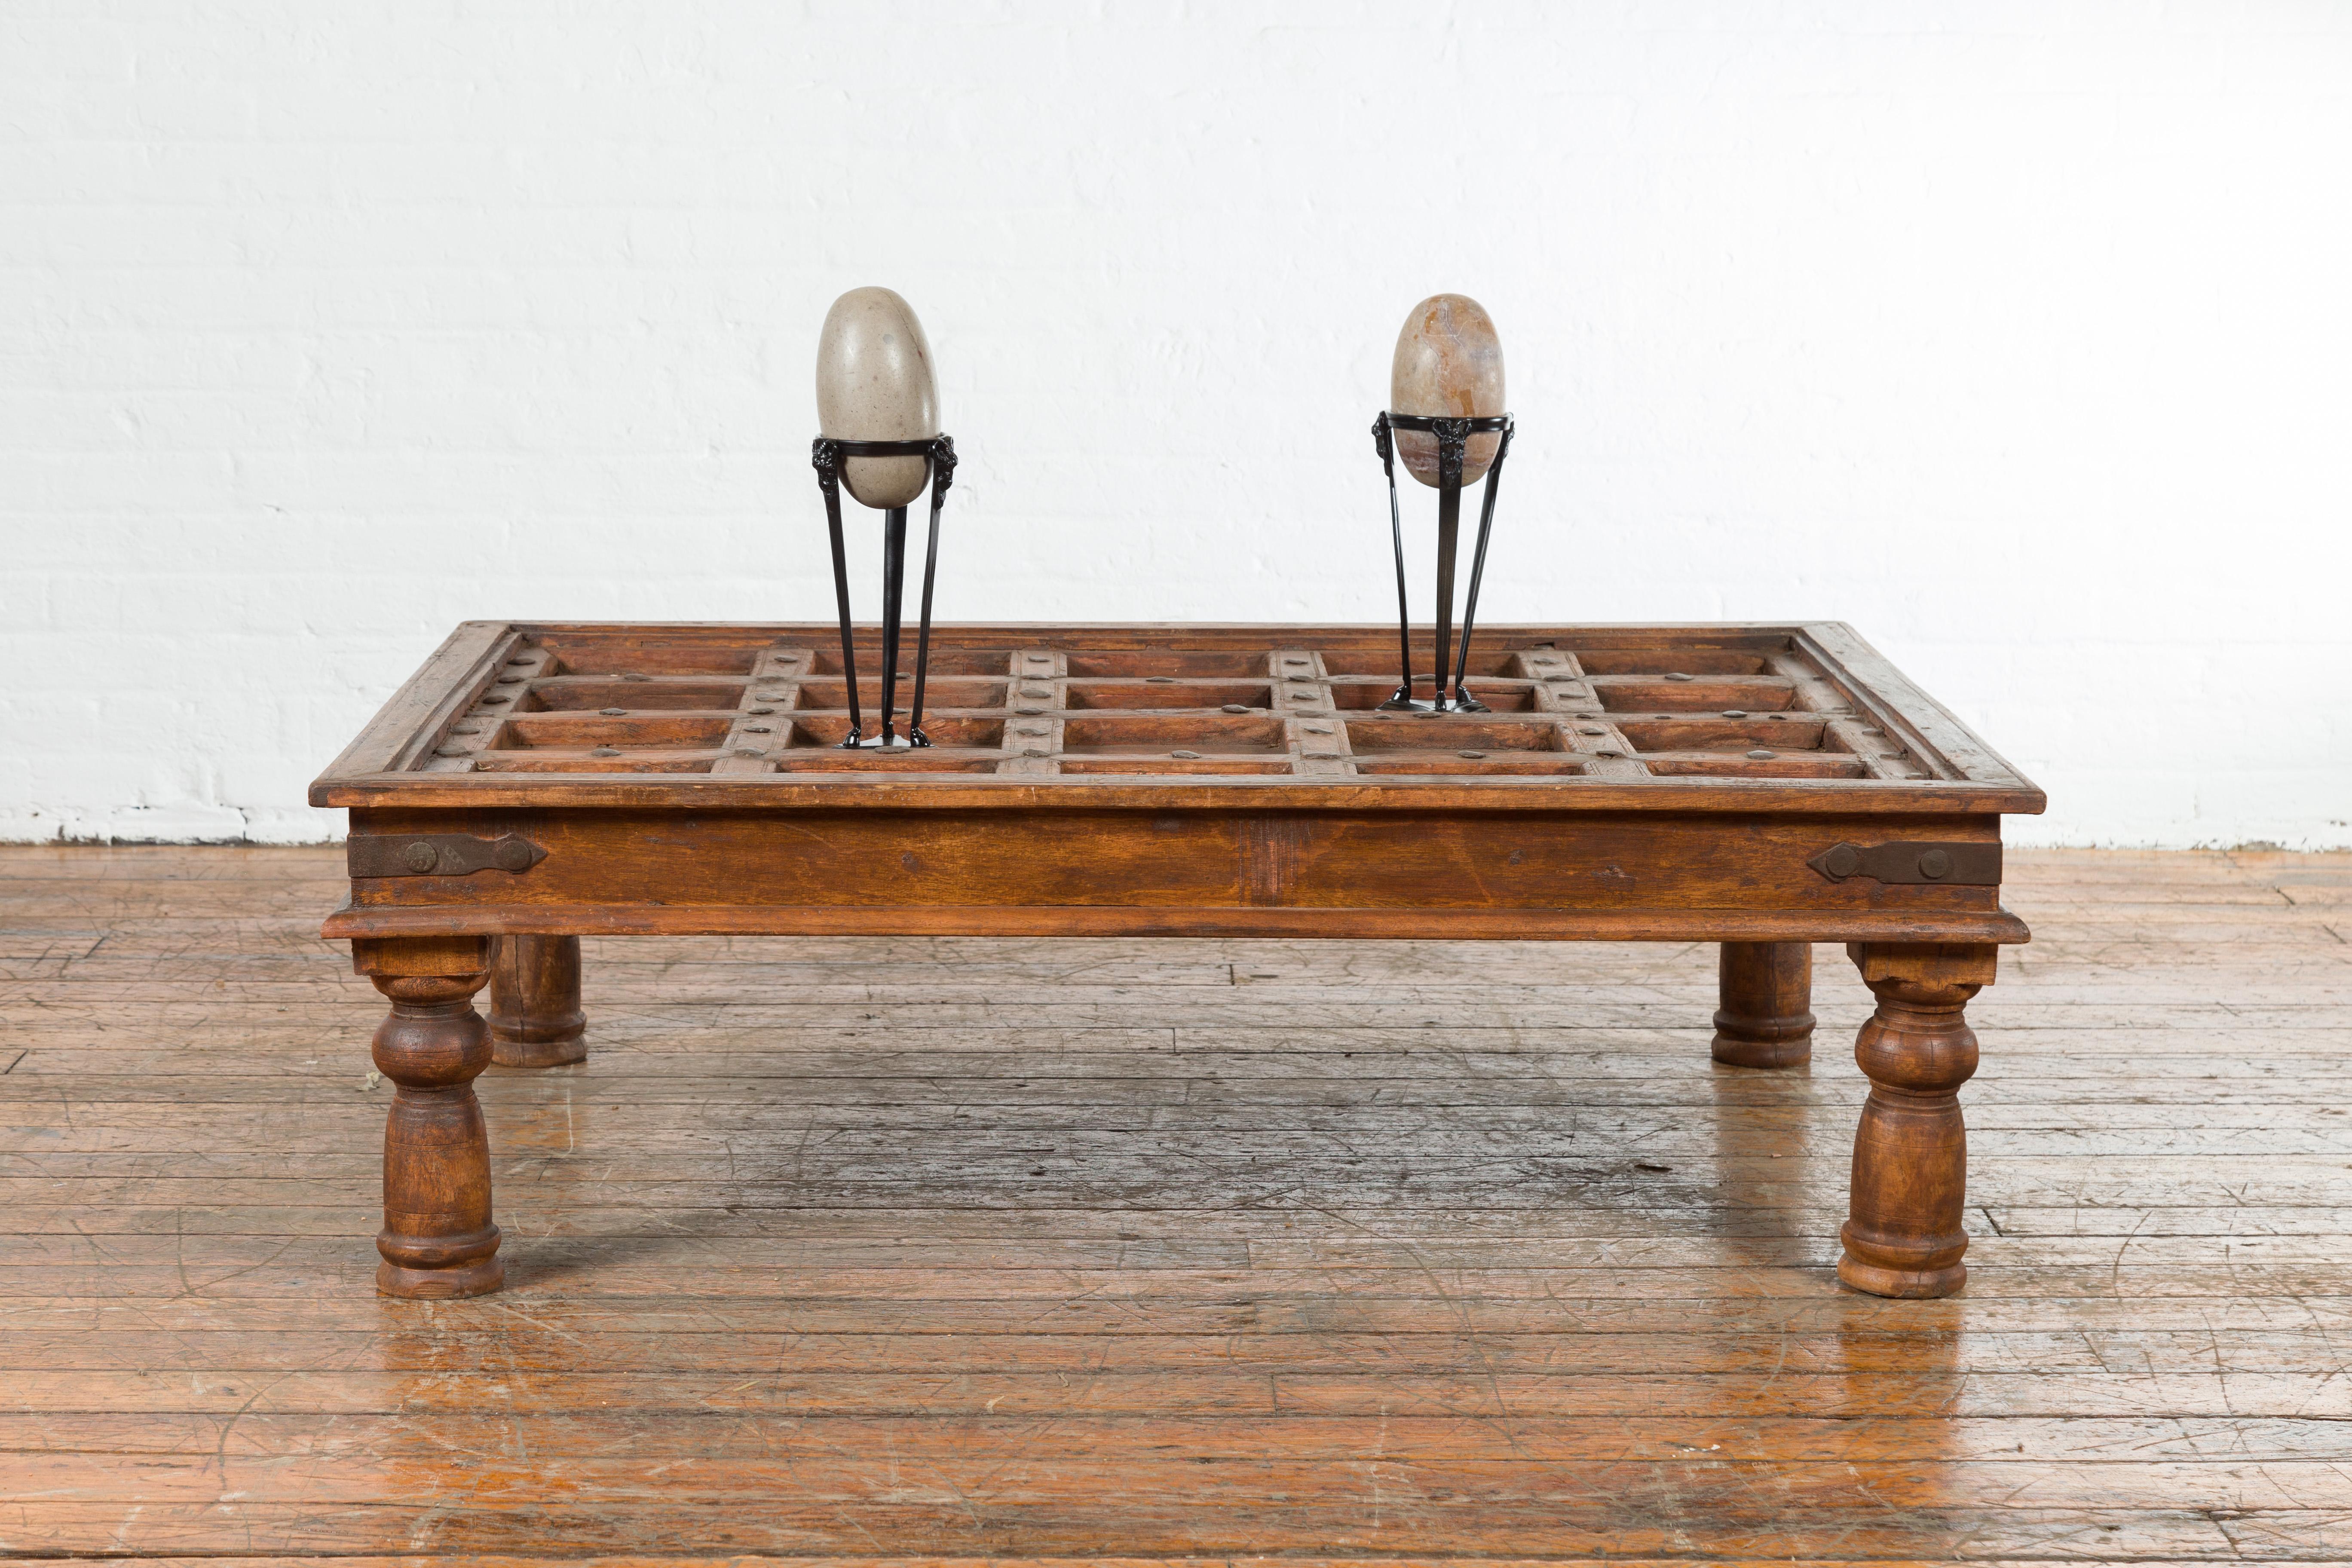 An Indian antique door with iron accents from the 19th century, turned into a coffee table. Created in India during the 19th century, this antique door has been made into a coffee table. The top, showcasing a succession of recessed panels, is